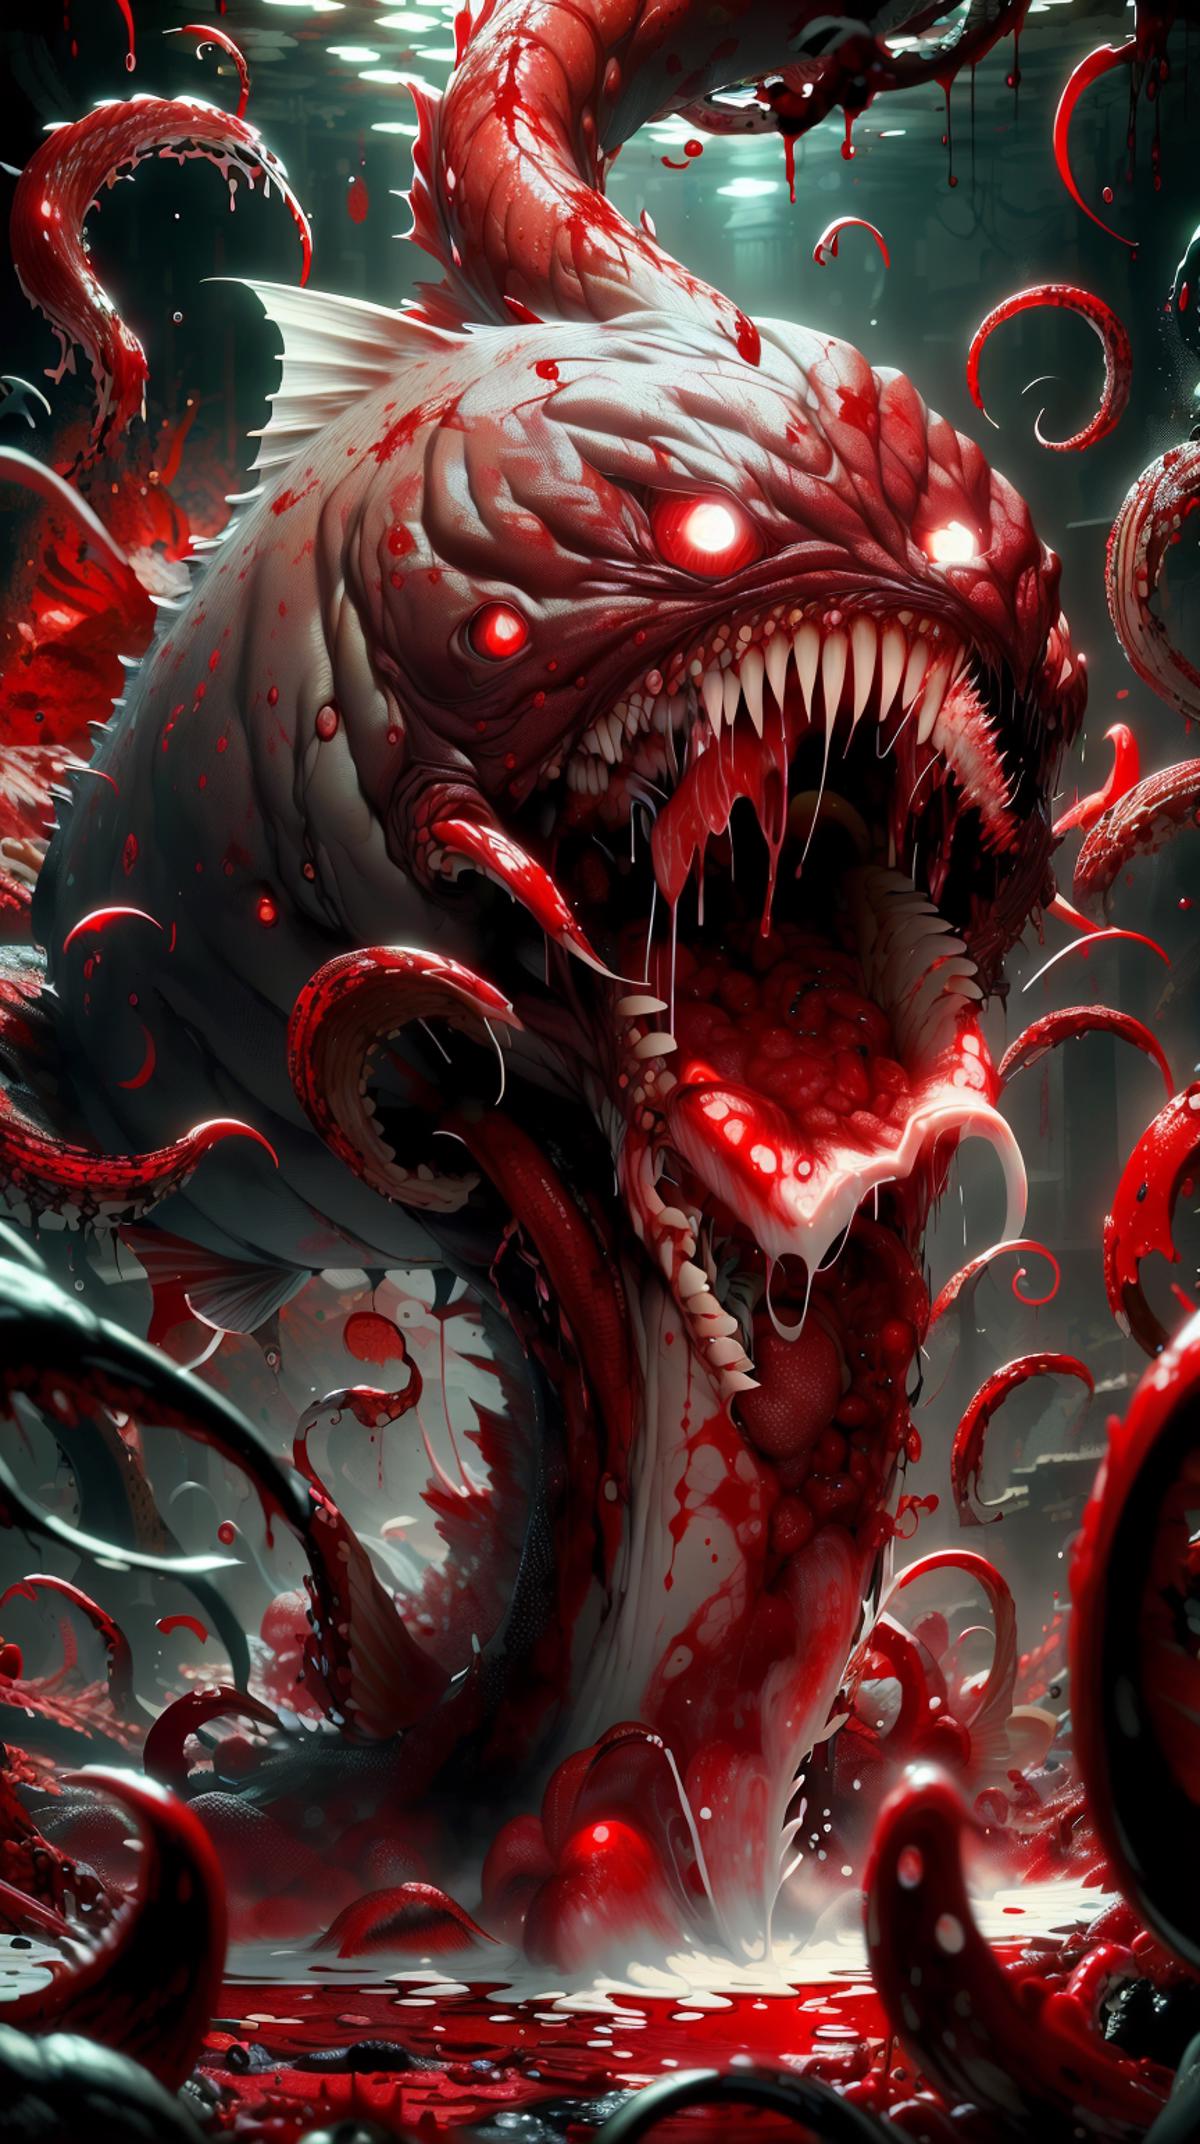 Carnage Style! - Blood and gore - NSFW - NSFAnywhere! image by mnemic